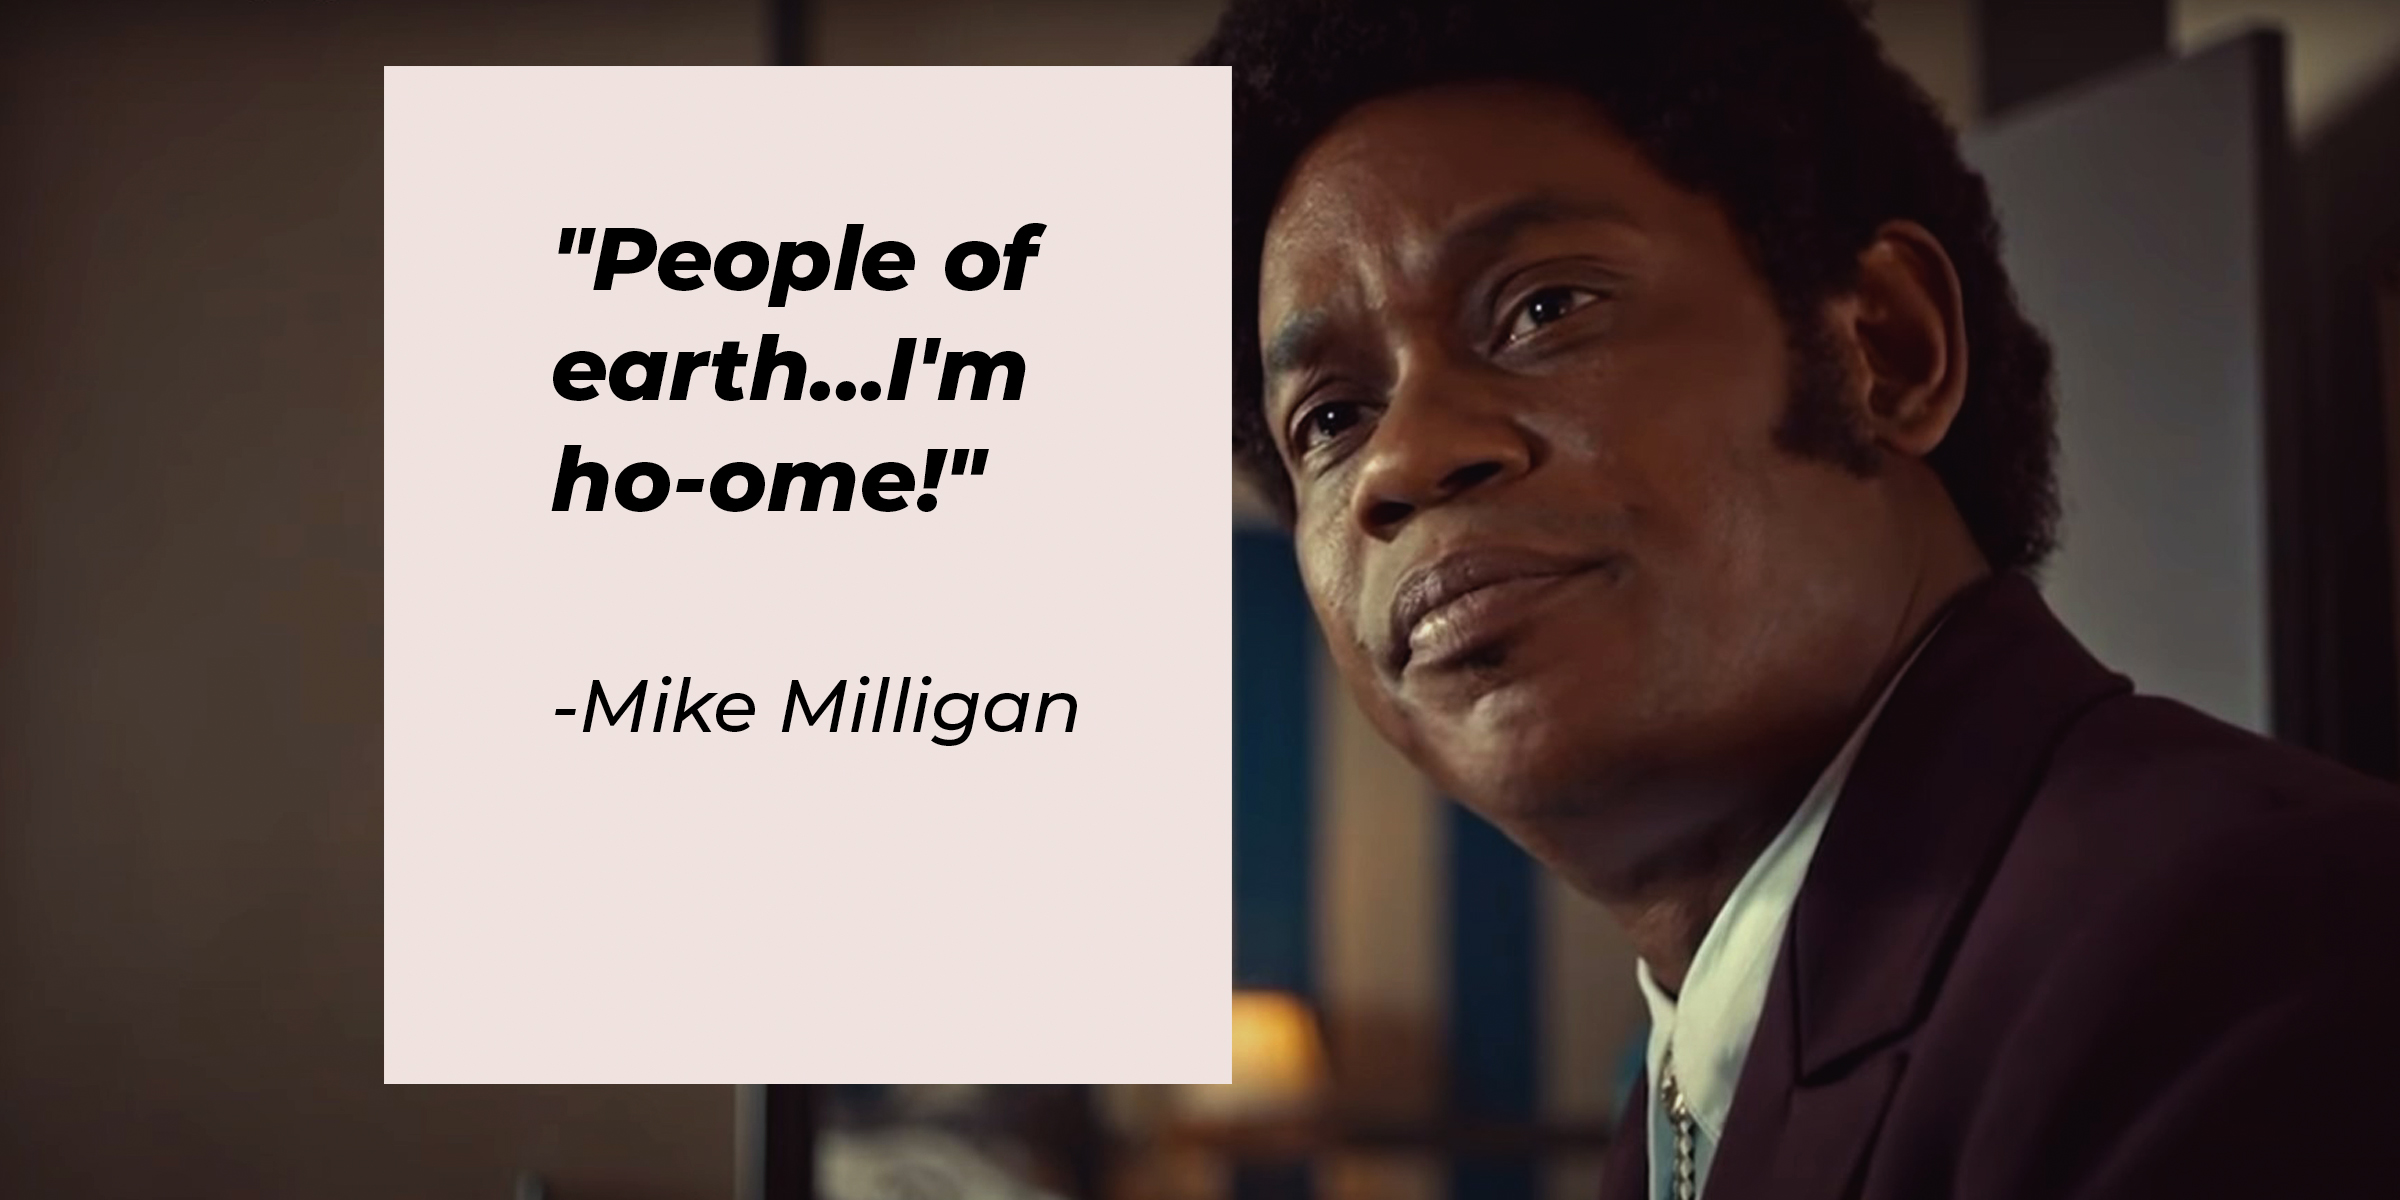 Mike Milligan with his quote: "People of earth...I'm ho-ome!" | Source: youtube.com/Netf